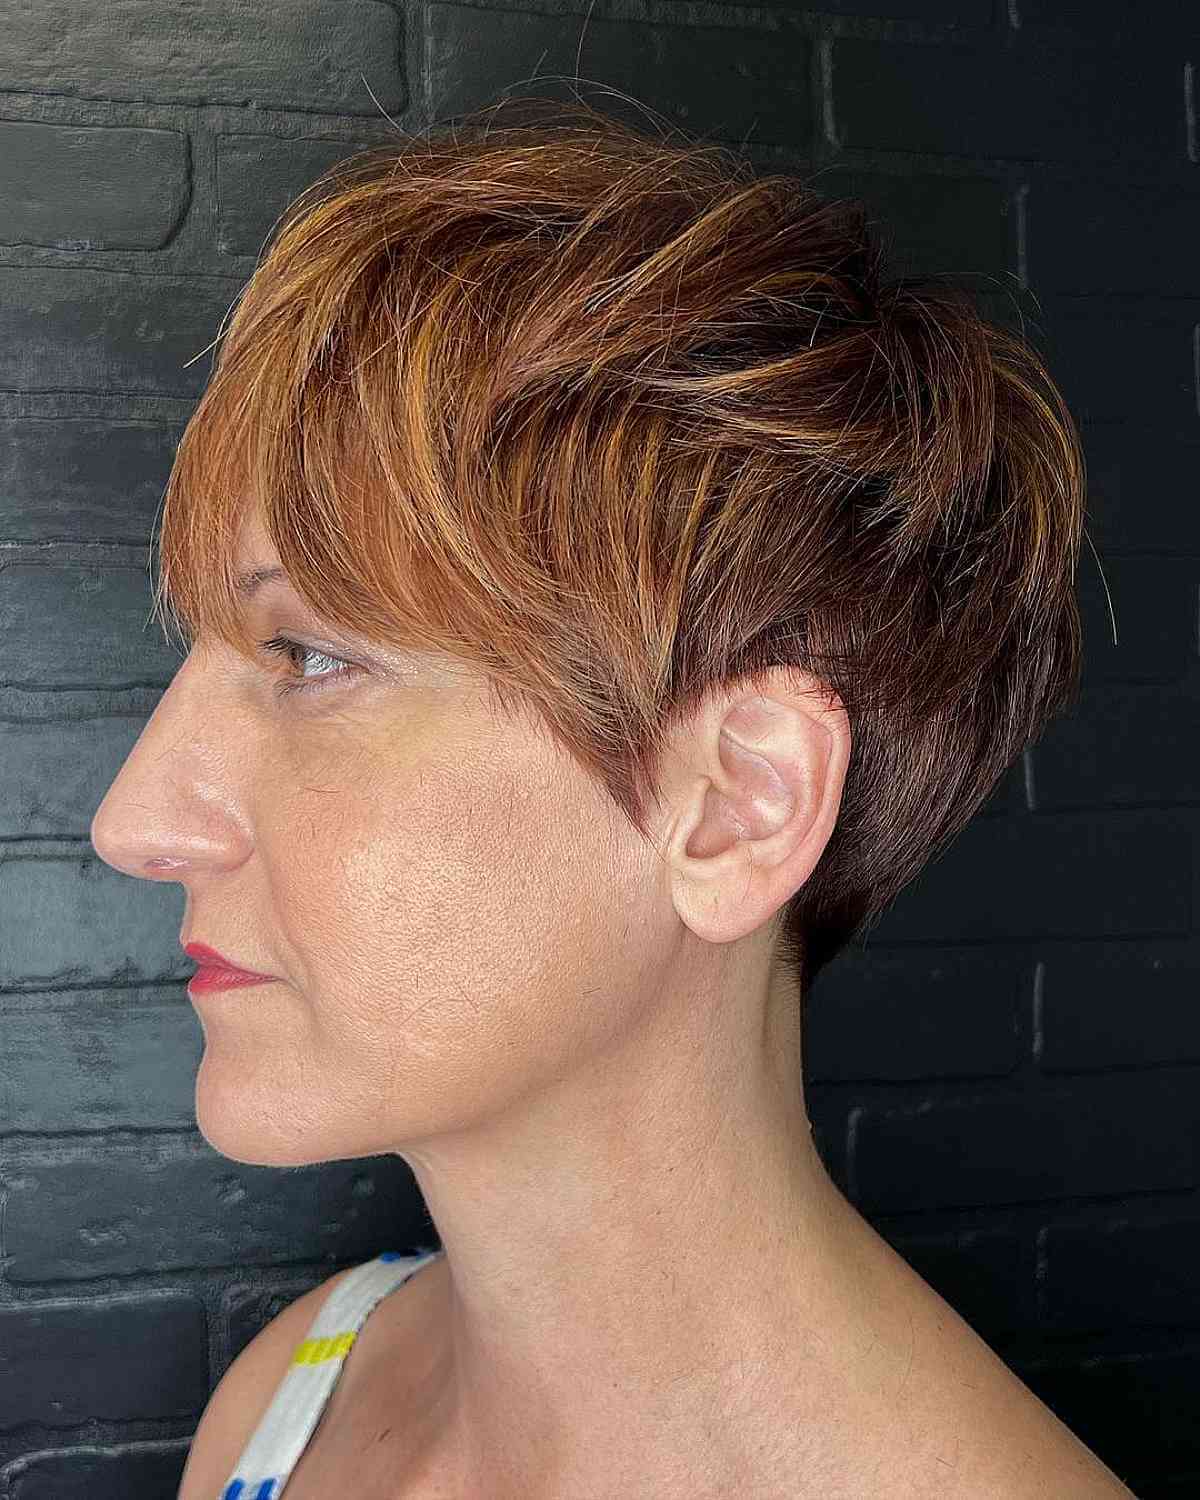 35 Cutest Ways to Get a Pixie Cut with Highlights for a Dimensional Crop